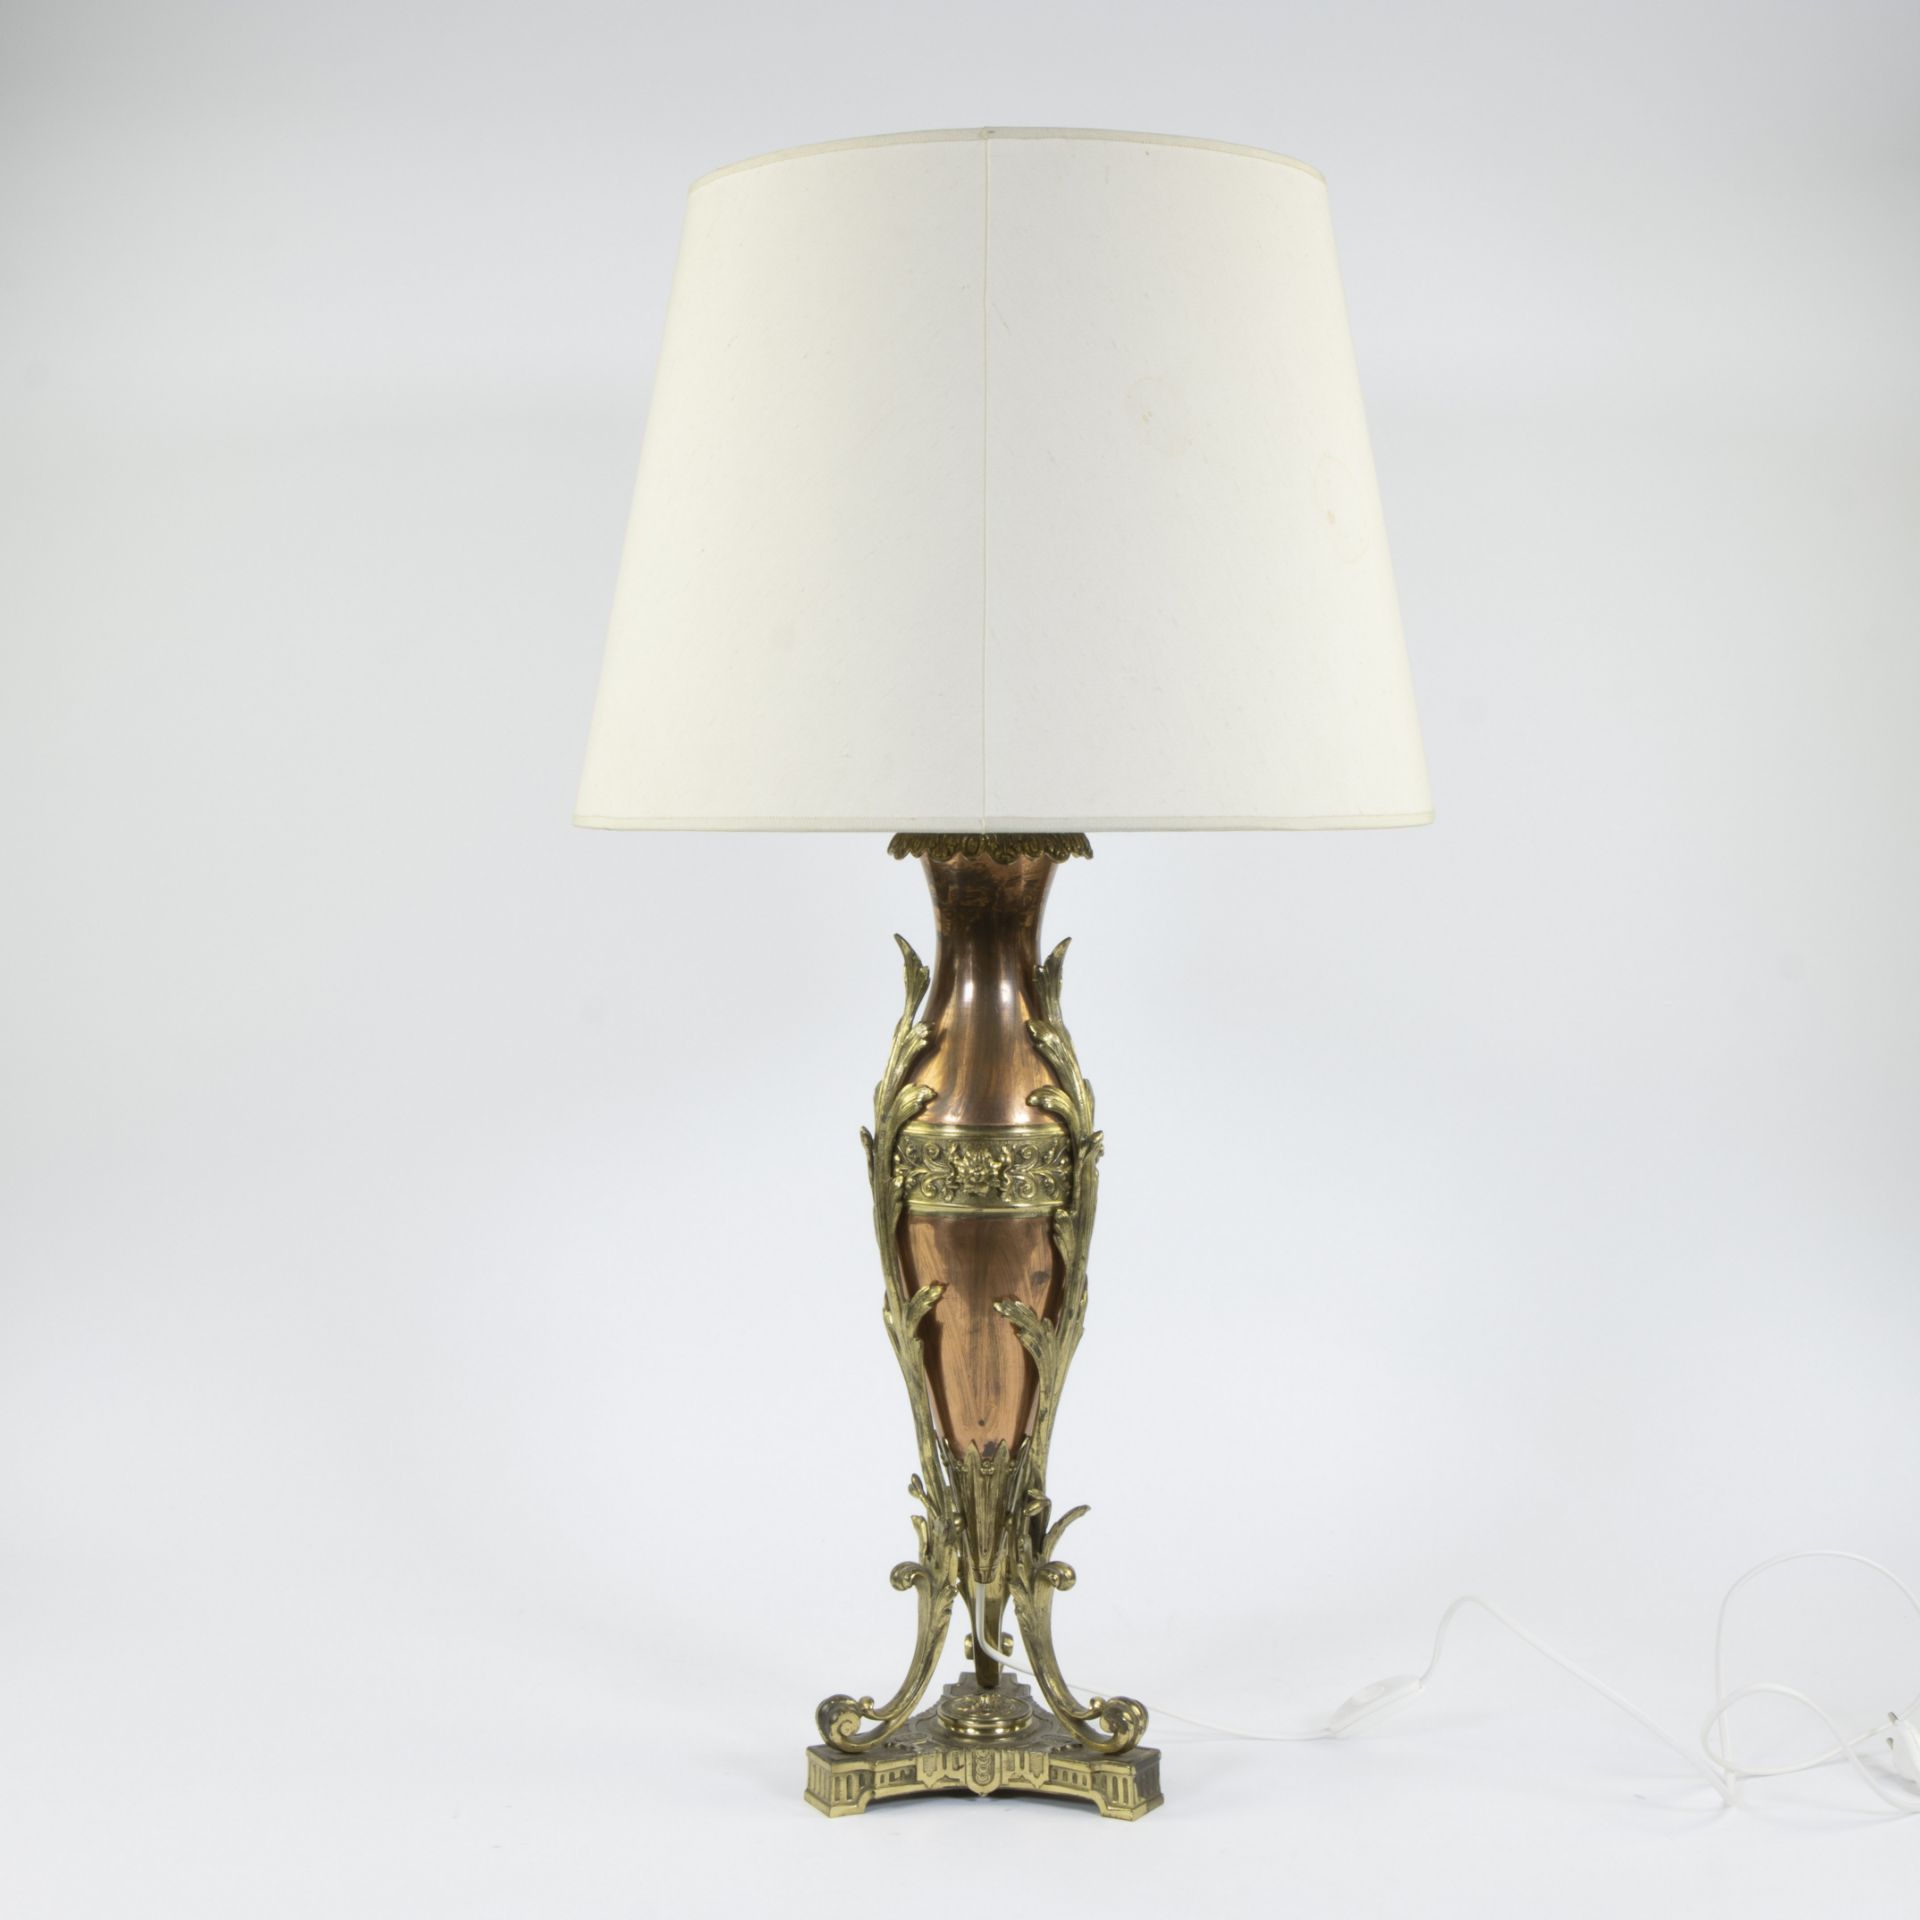 Lampadaire with base in copper and gilt brass, early 20th century